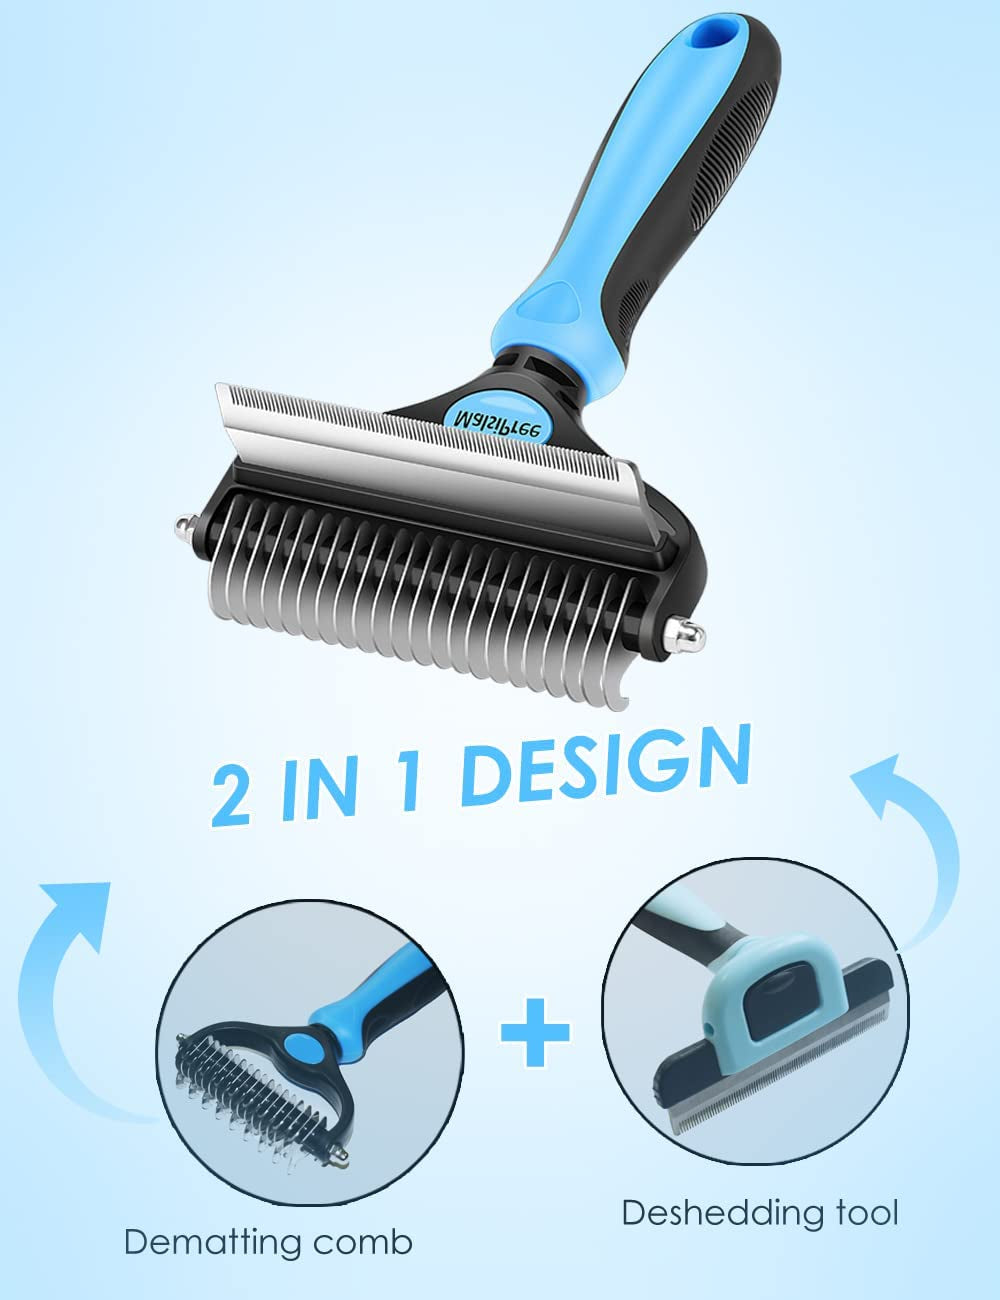 Malsipree Pet Grooming Brush, 2 in 1 Deshedding Tool & Undercoat Rake Dematting Comb for Mats & Tangles Removing, Reduces Shedding up to 95%, Great for Short to Long Hair of Medium Large Dogs